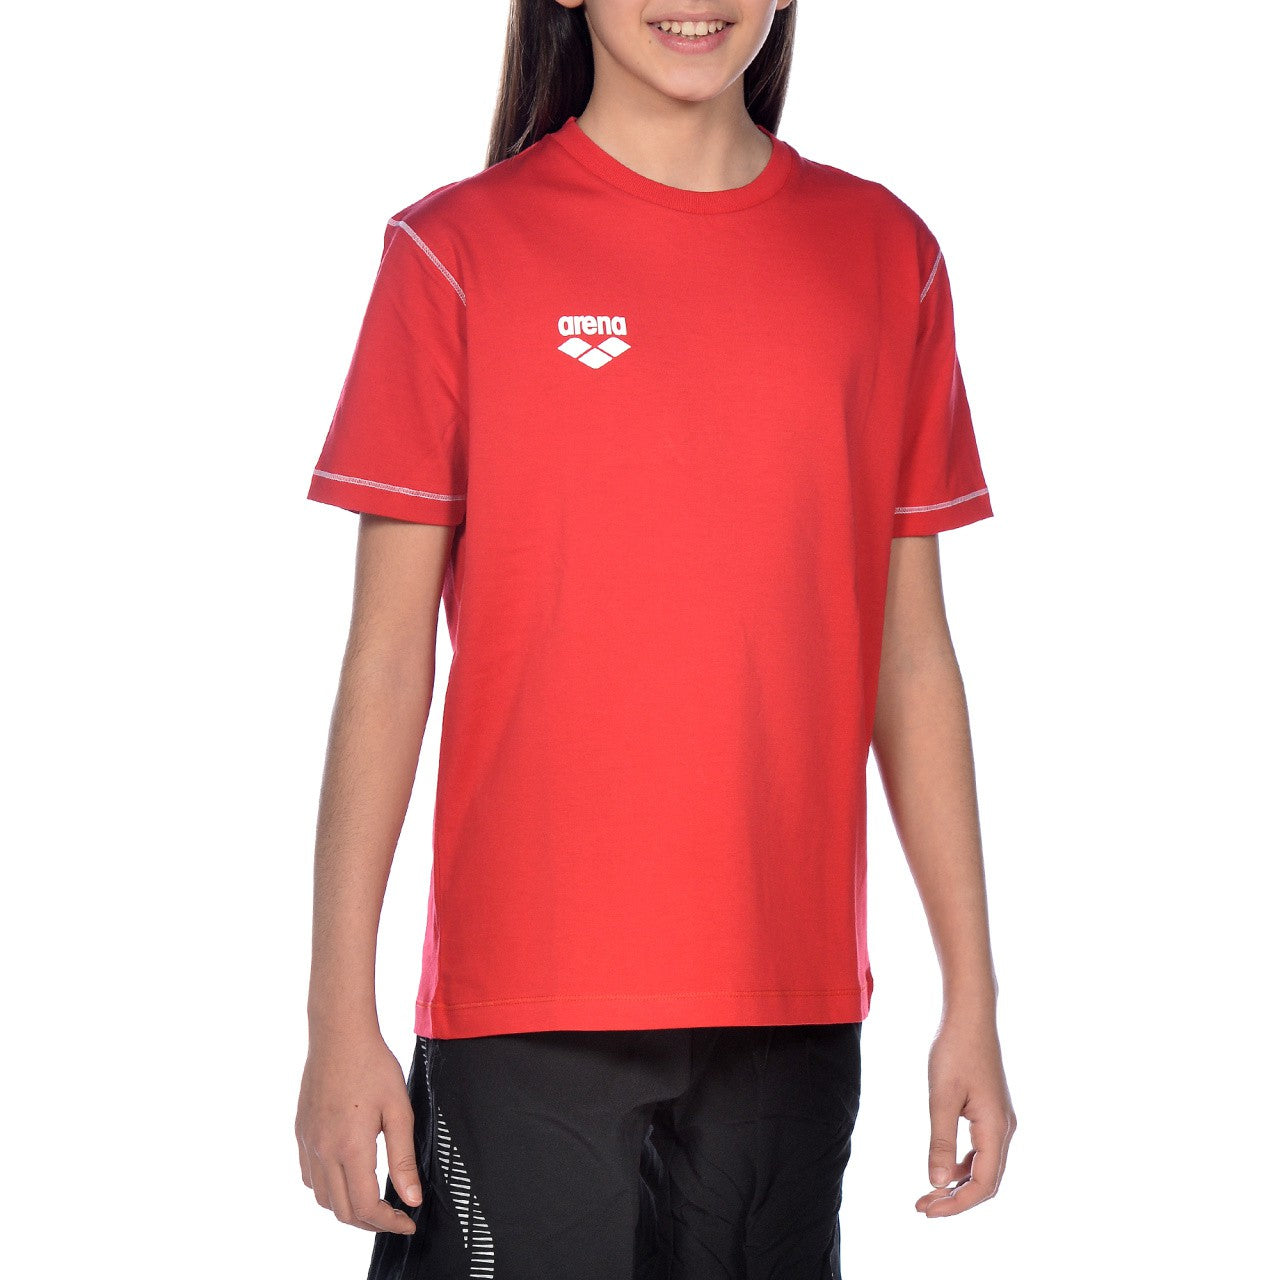 Jr Tl S/S Tee red